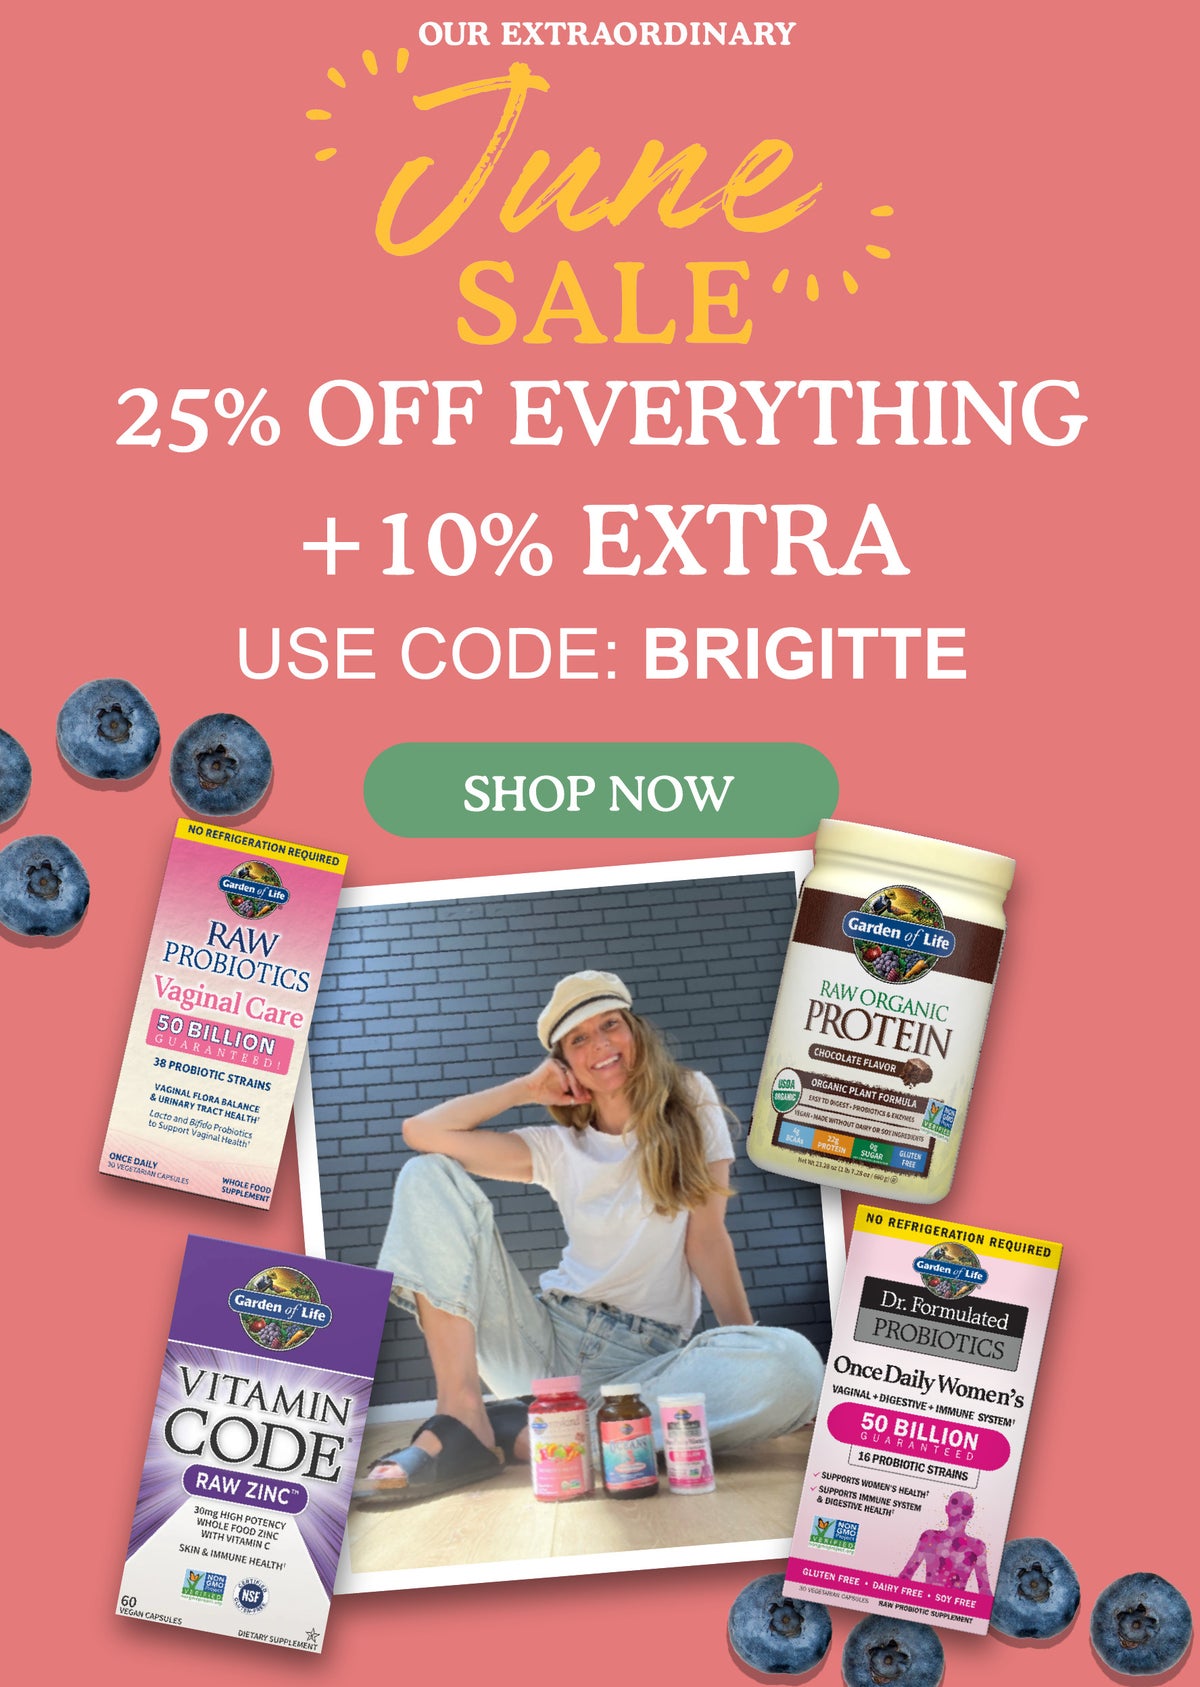 25% off everything